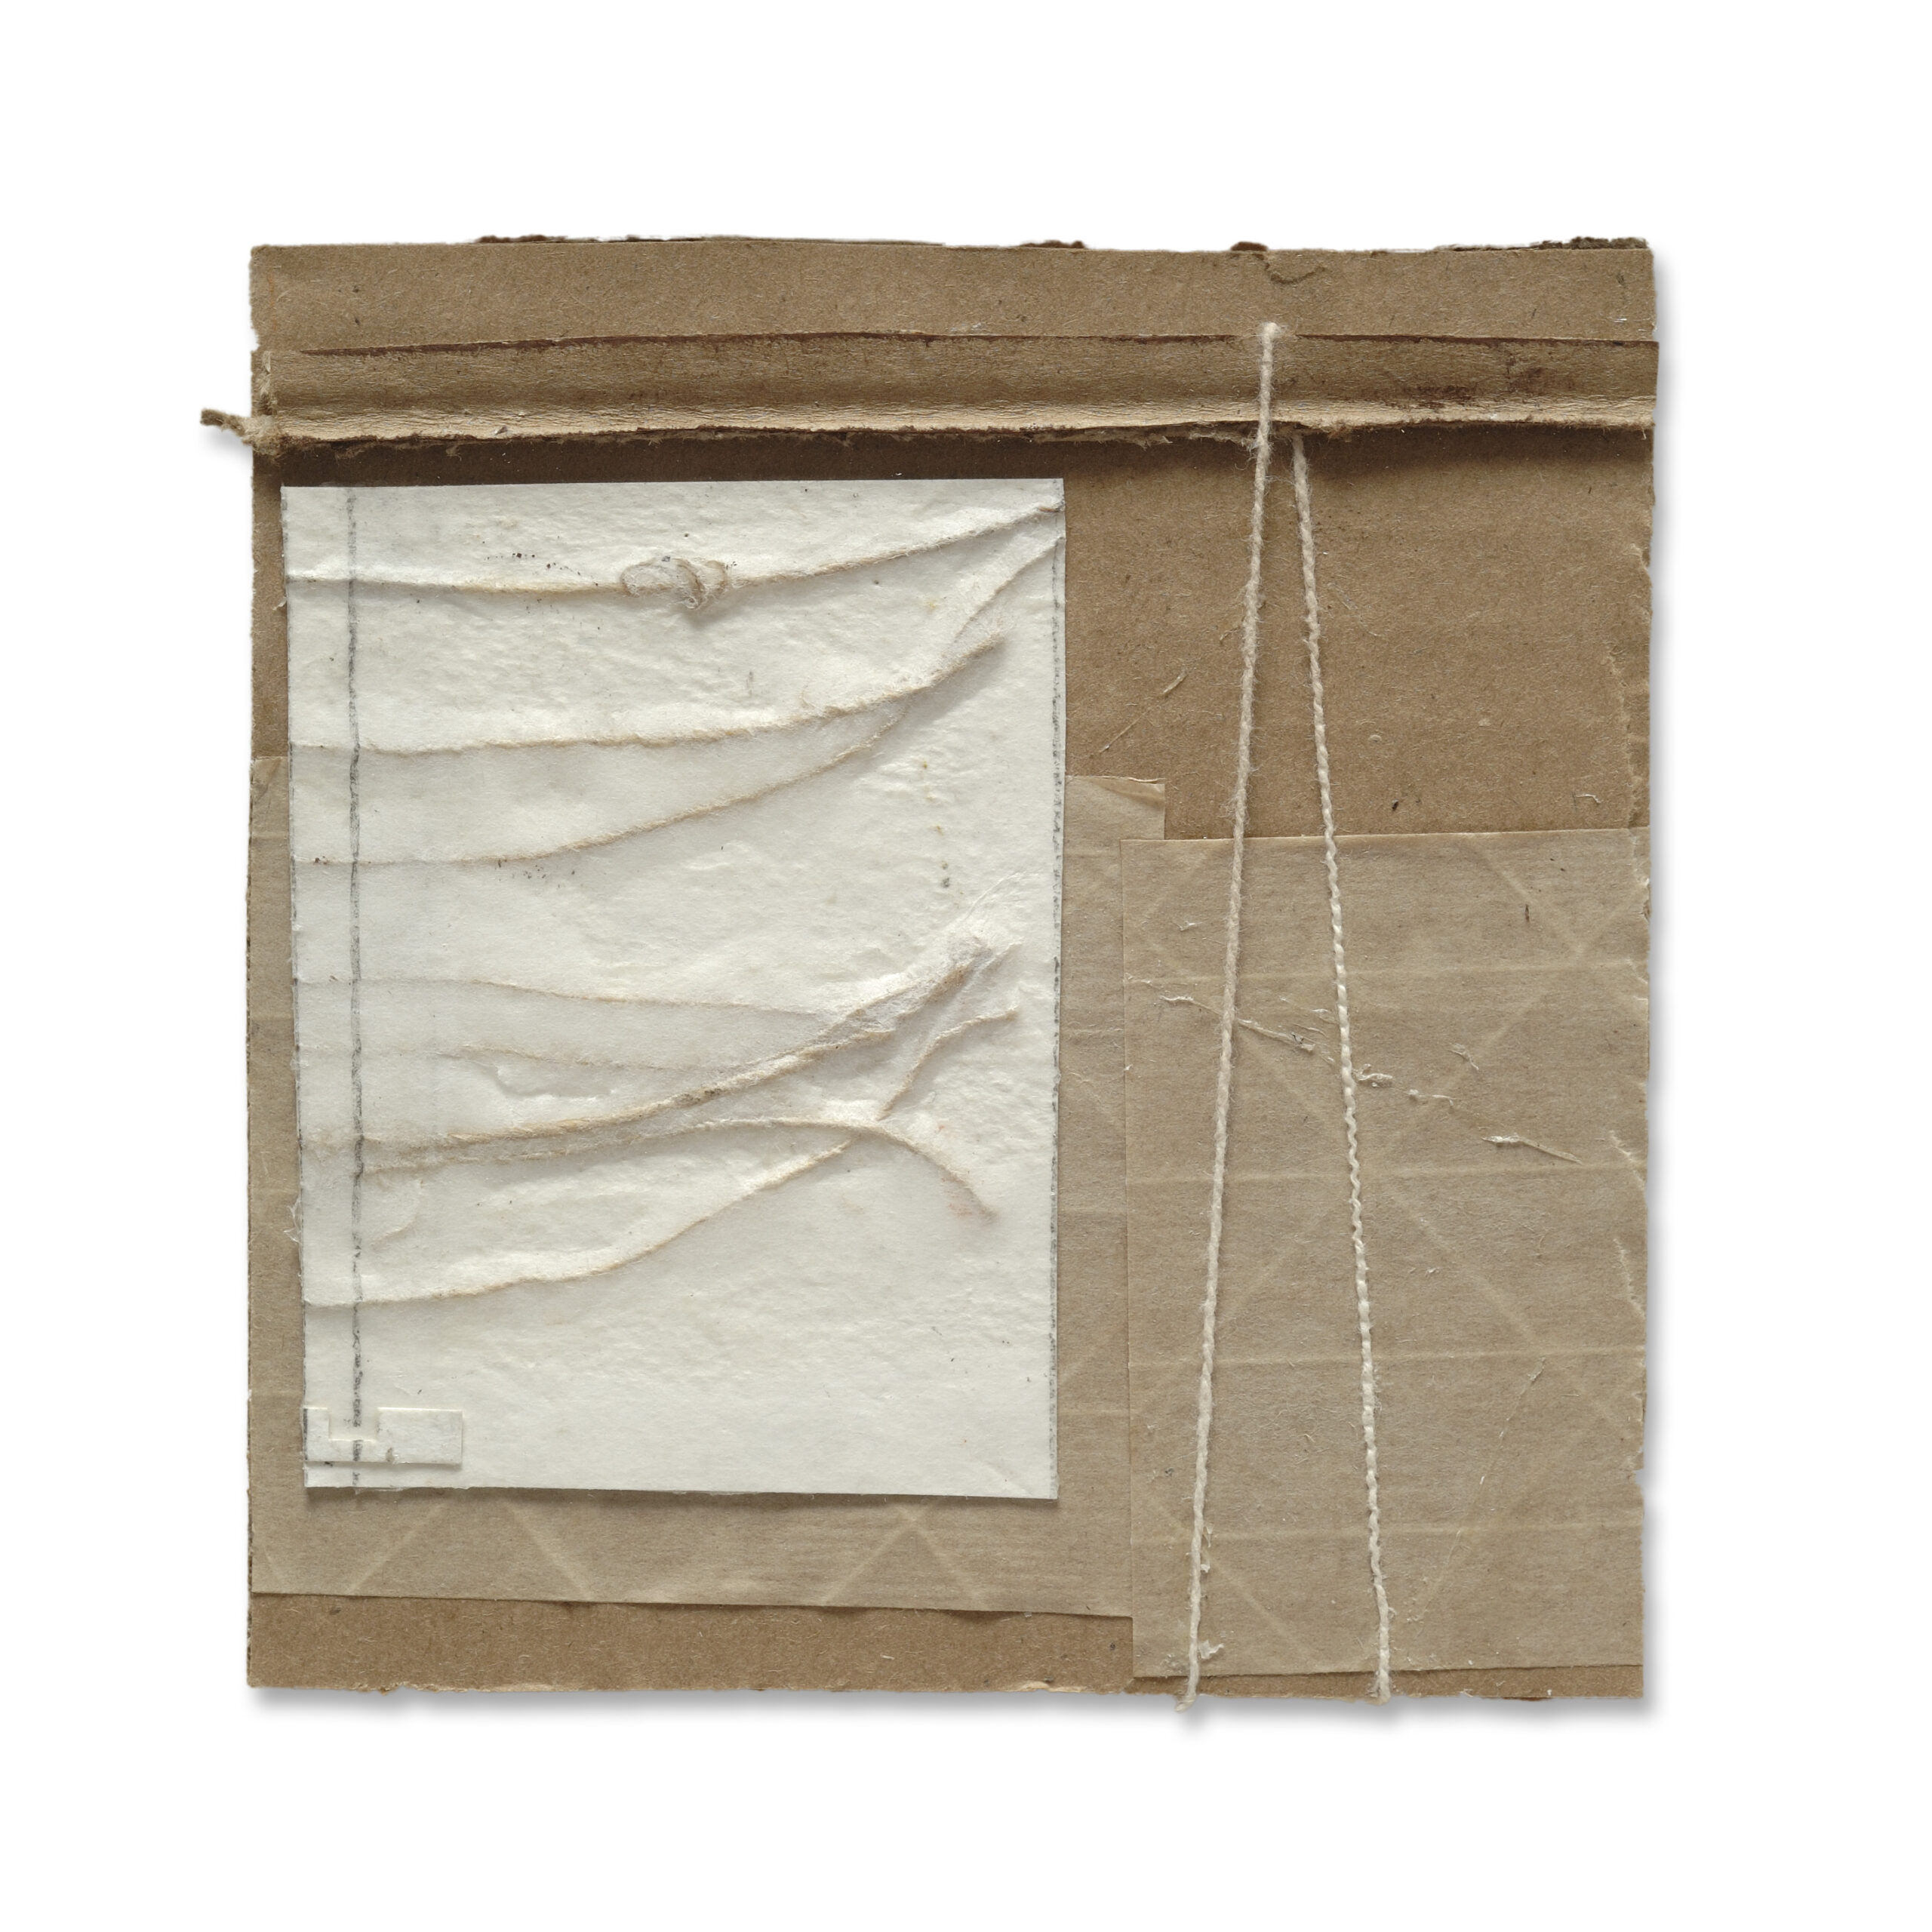 UNTITLED (TR632), 2015 hemp thread, cotton thread, paper, paper tape, porcelain, grog on corrugated board, 4 3/4 x 4 1/2 inches